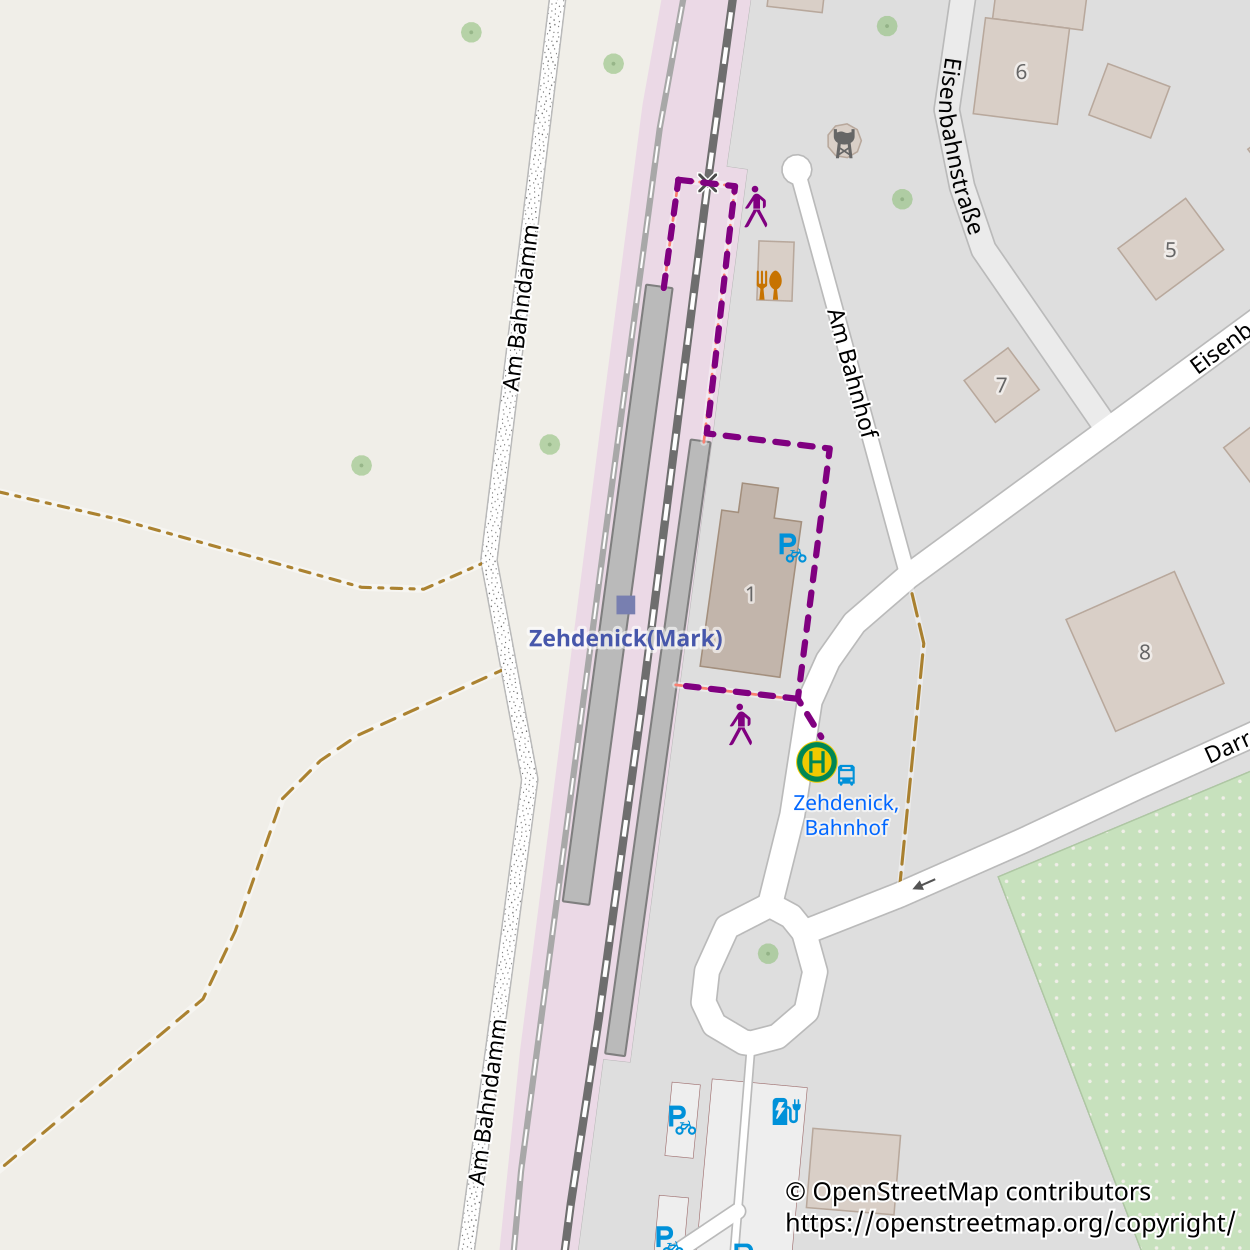 Map showing the train station and bus stop in Zehdenick